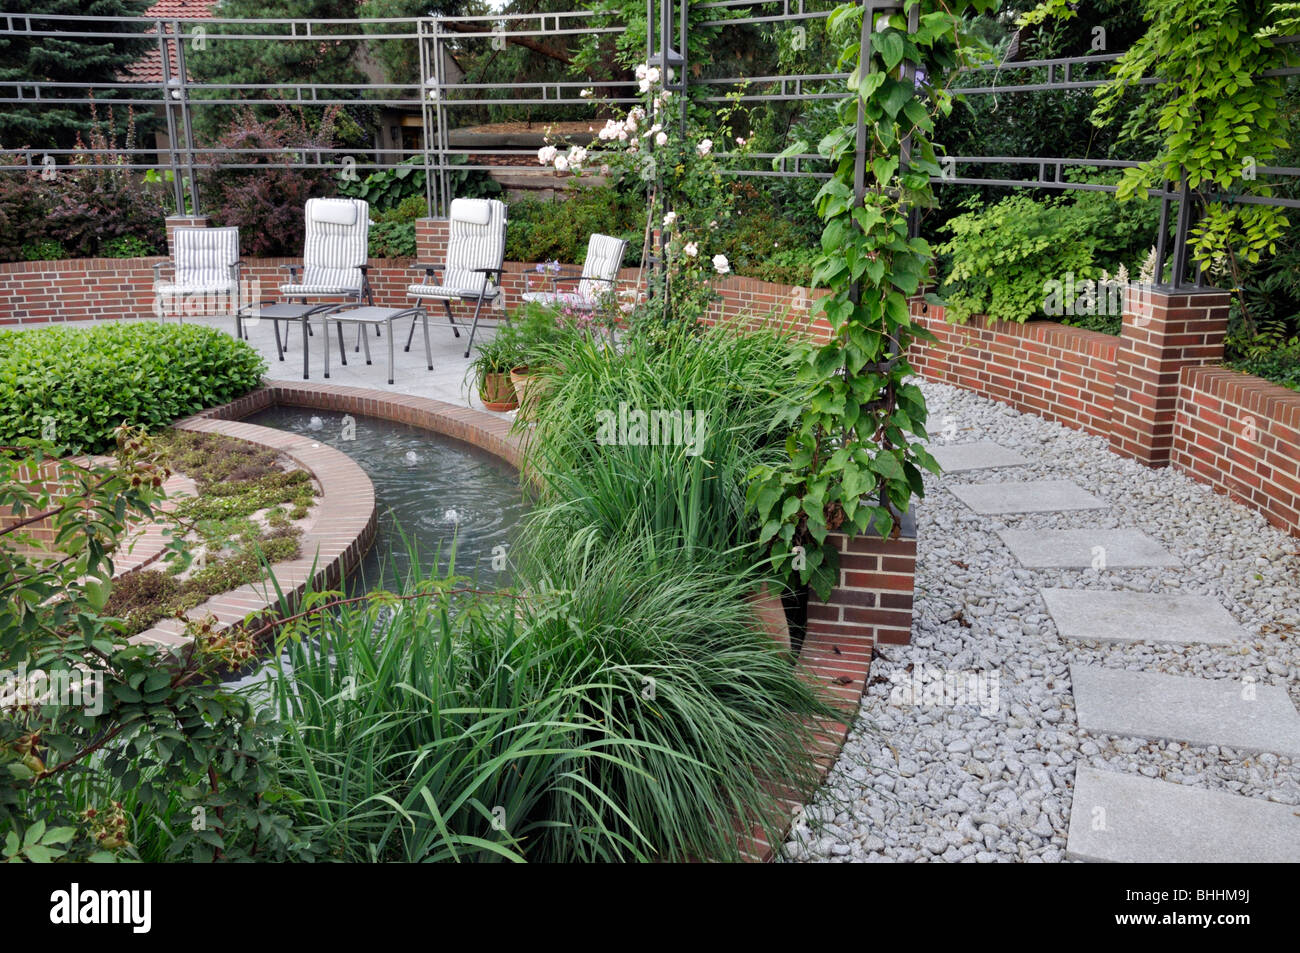 Semicircular plateau with seating area, water basin and pergola Stock Photo